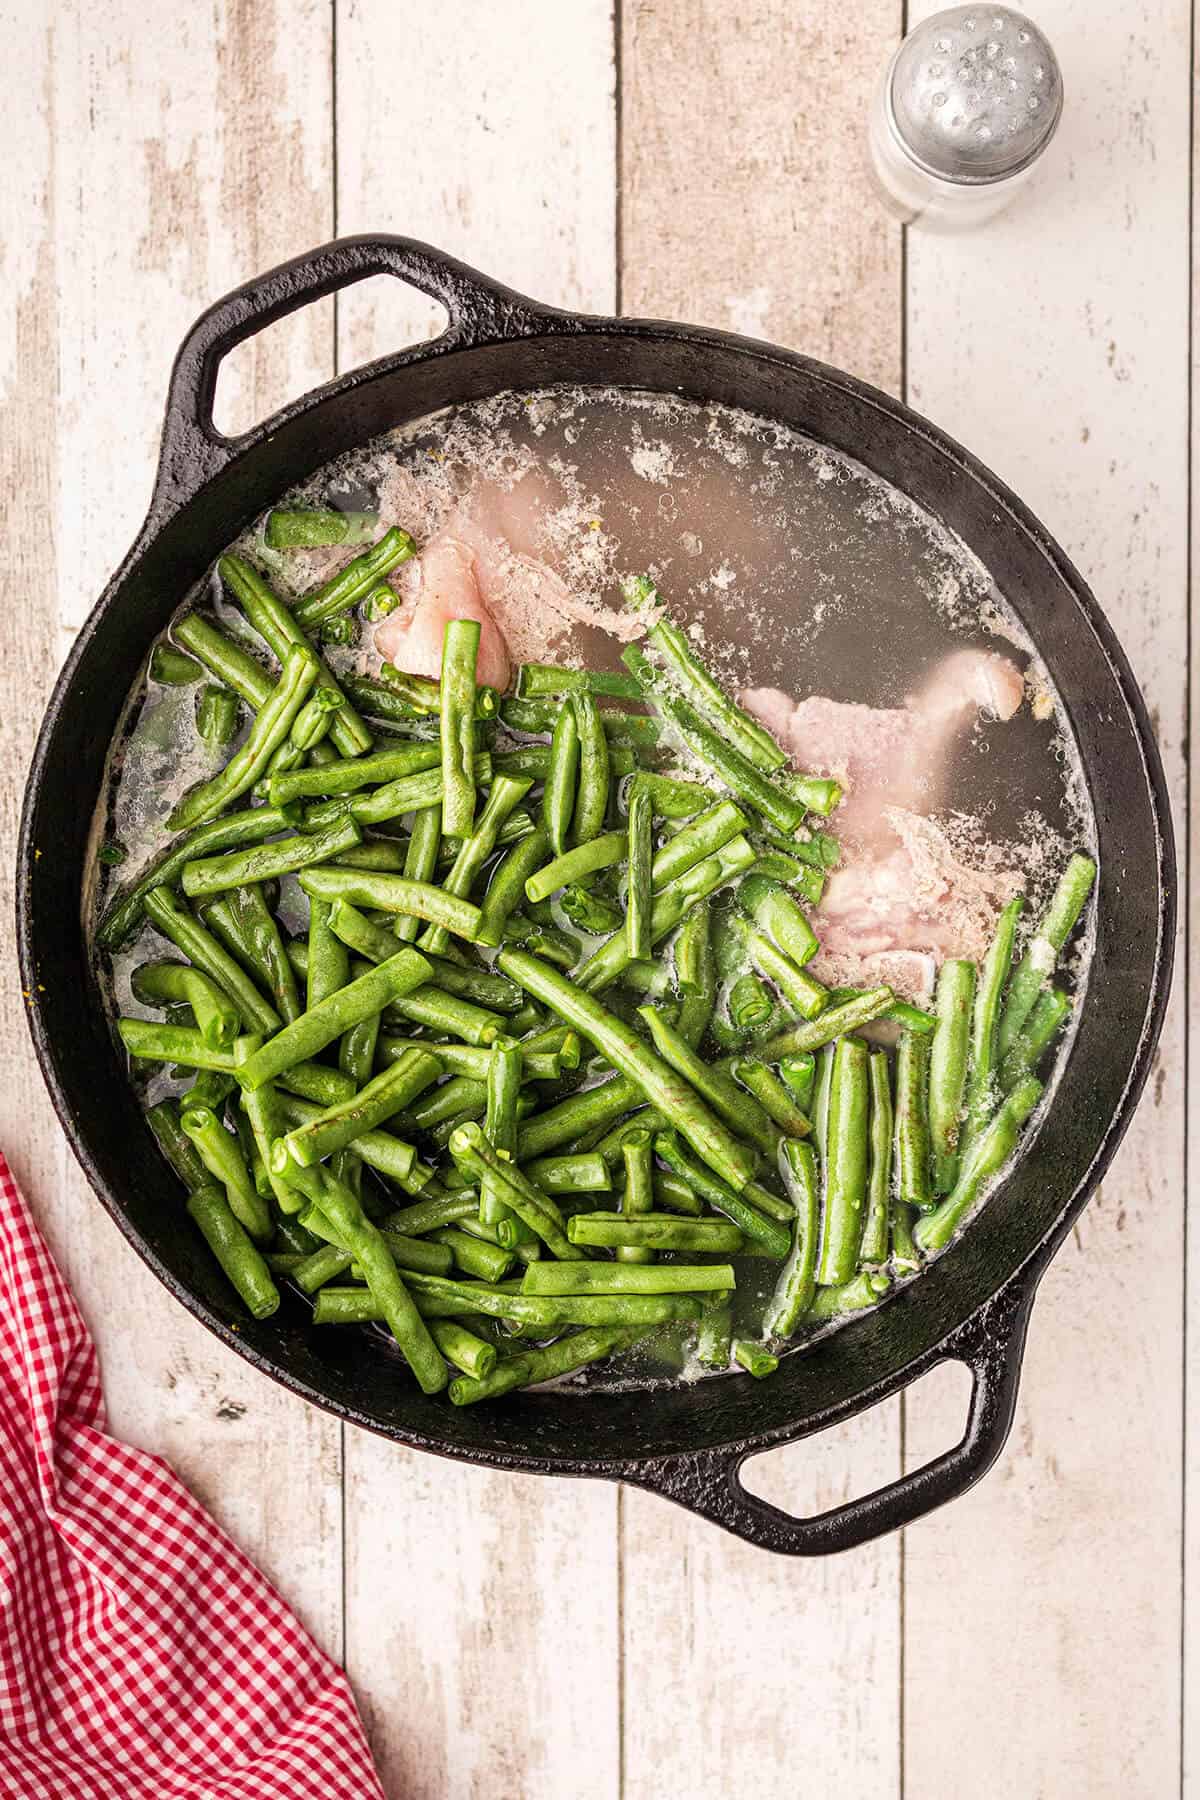 Cast iron cooking pot with ham hock broth and fresh green beans added.